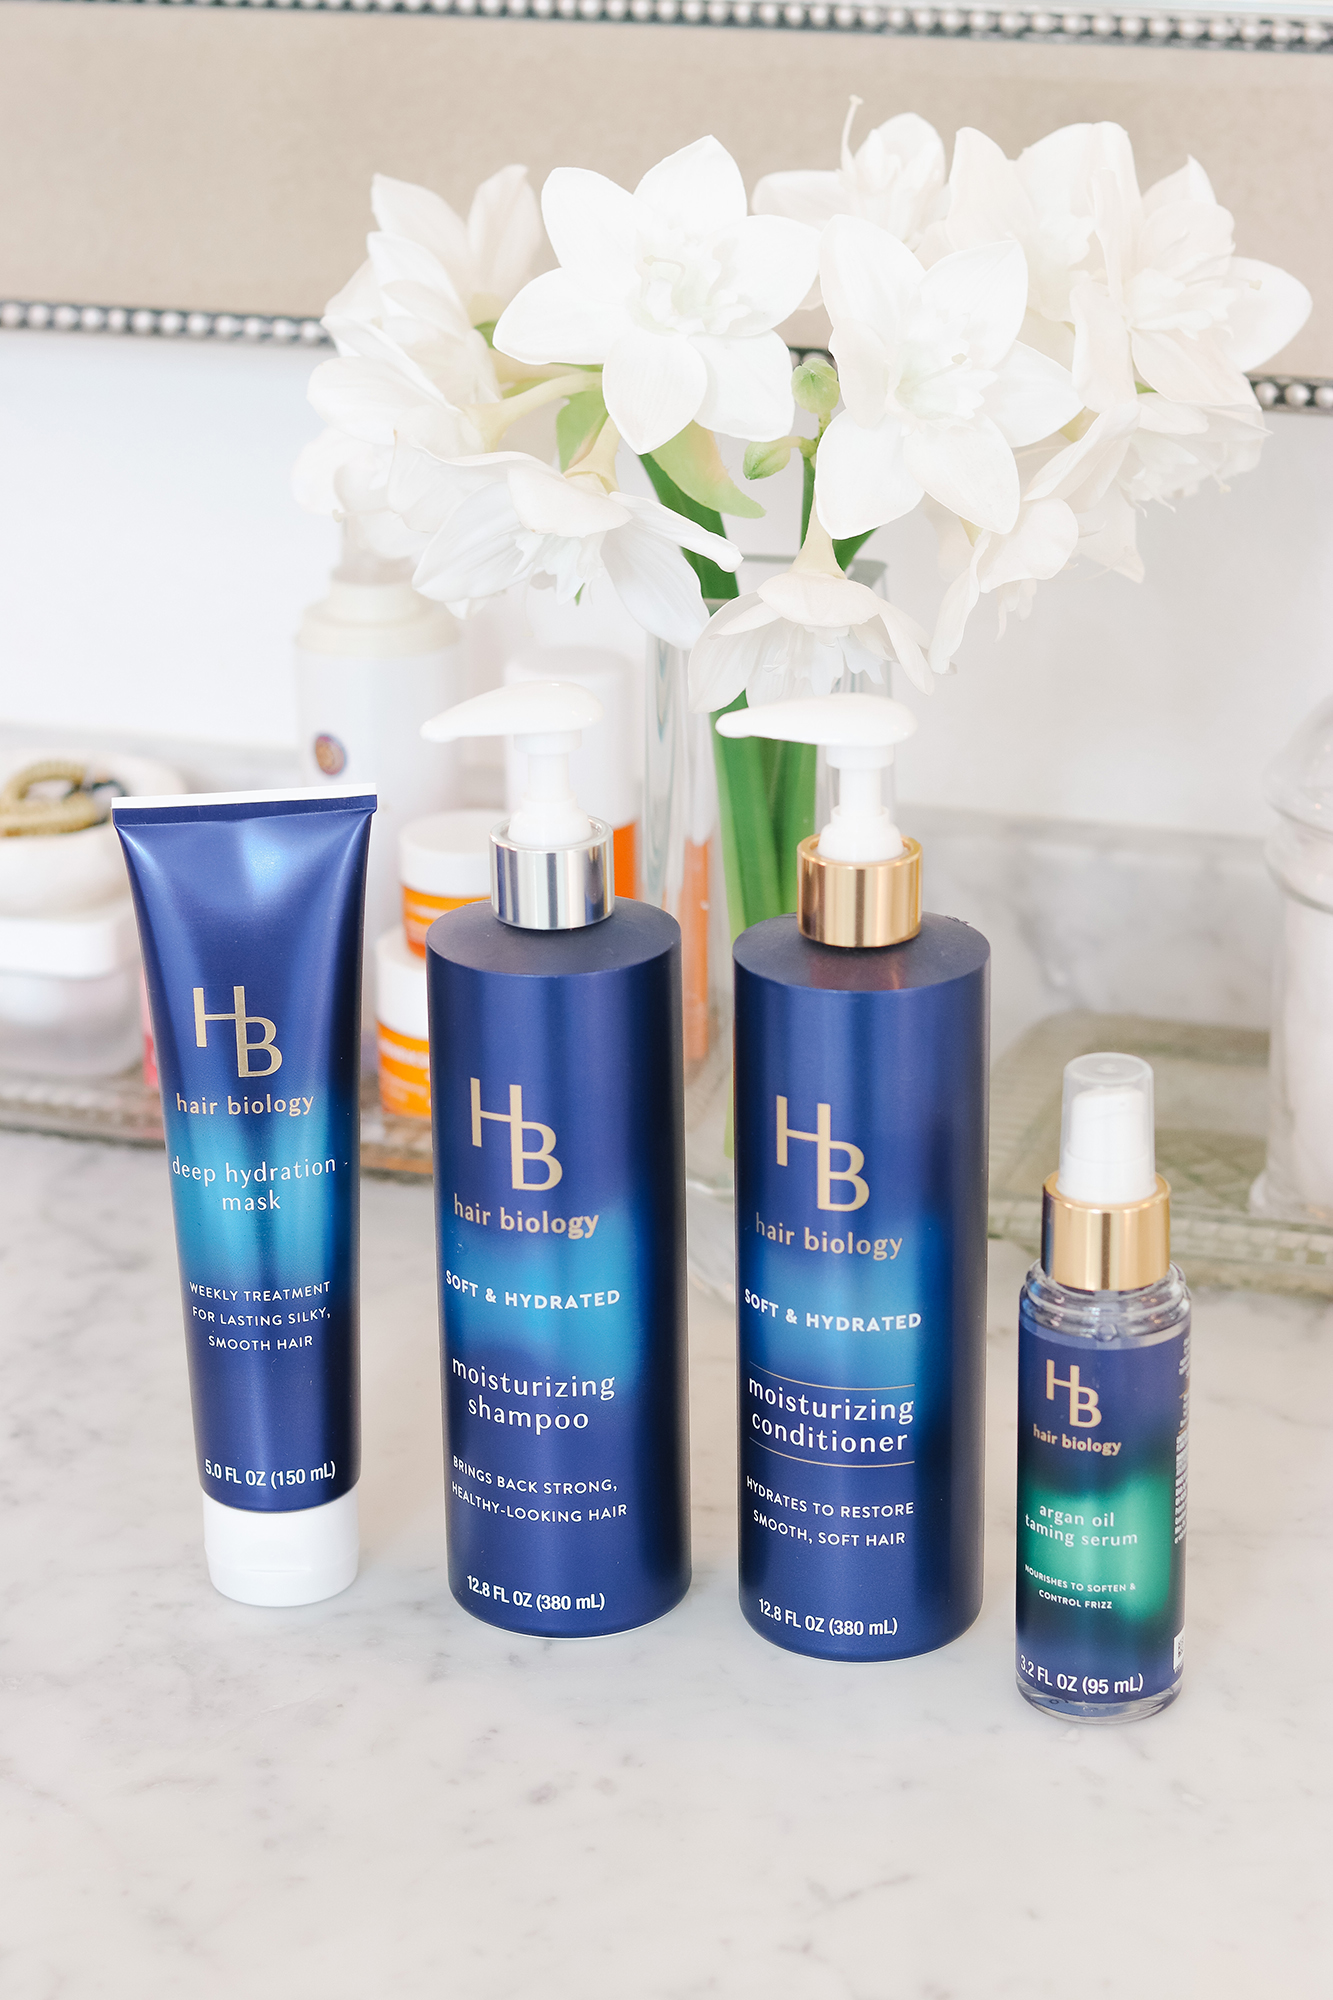 Hair Biology Review - Do these products really work for women who are 45+? A complete review on their Soft + Hydrated line. 